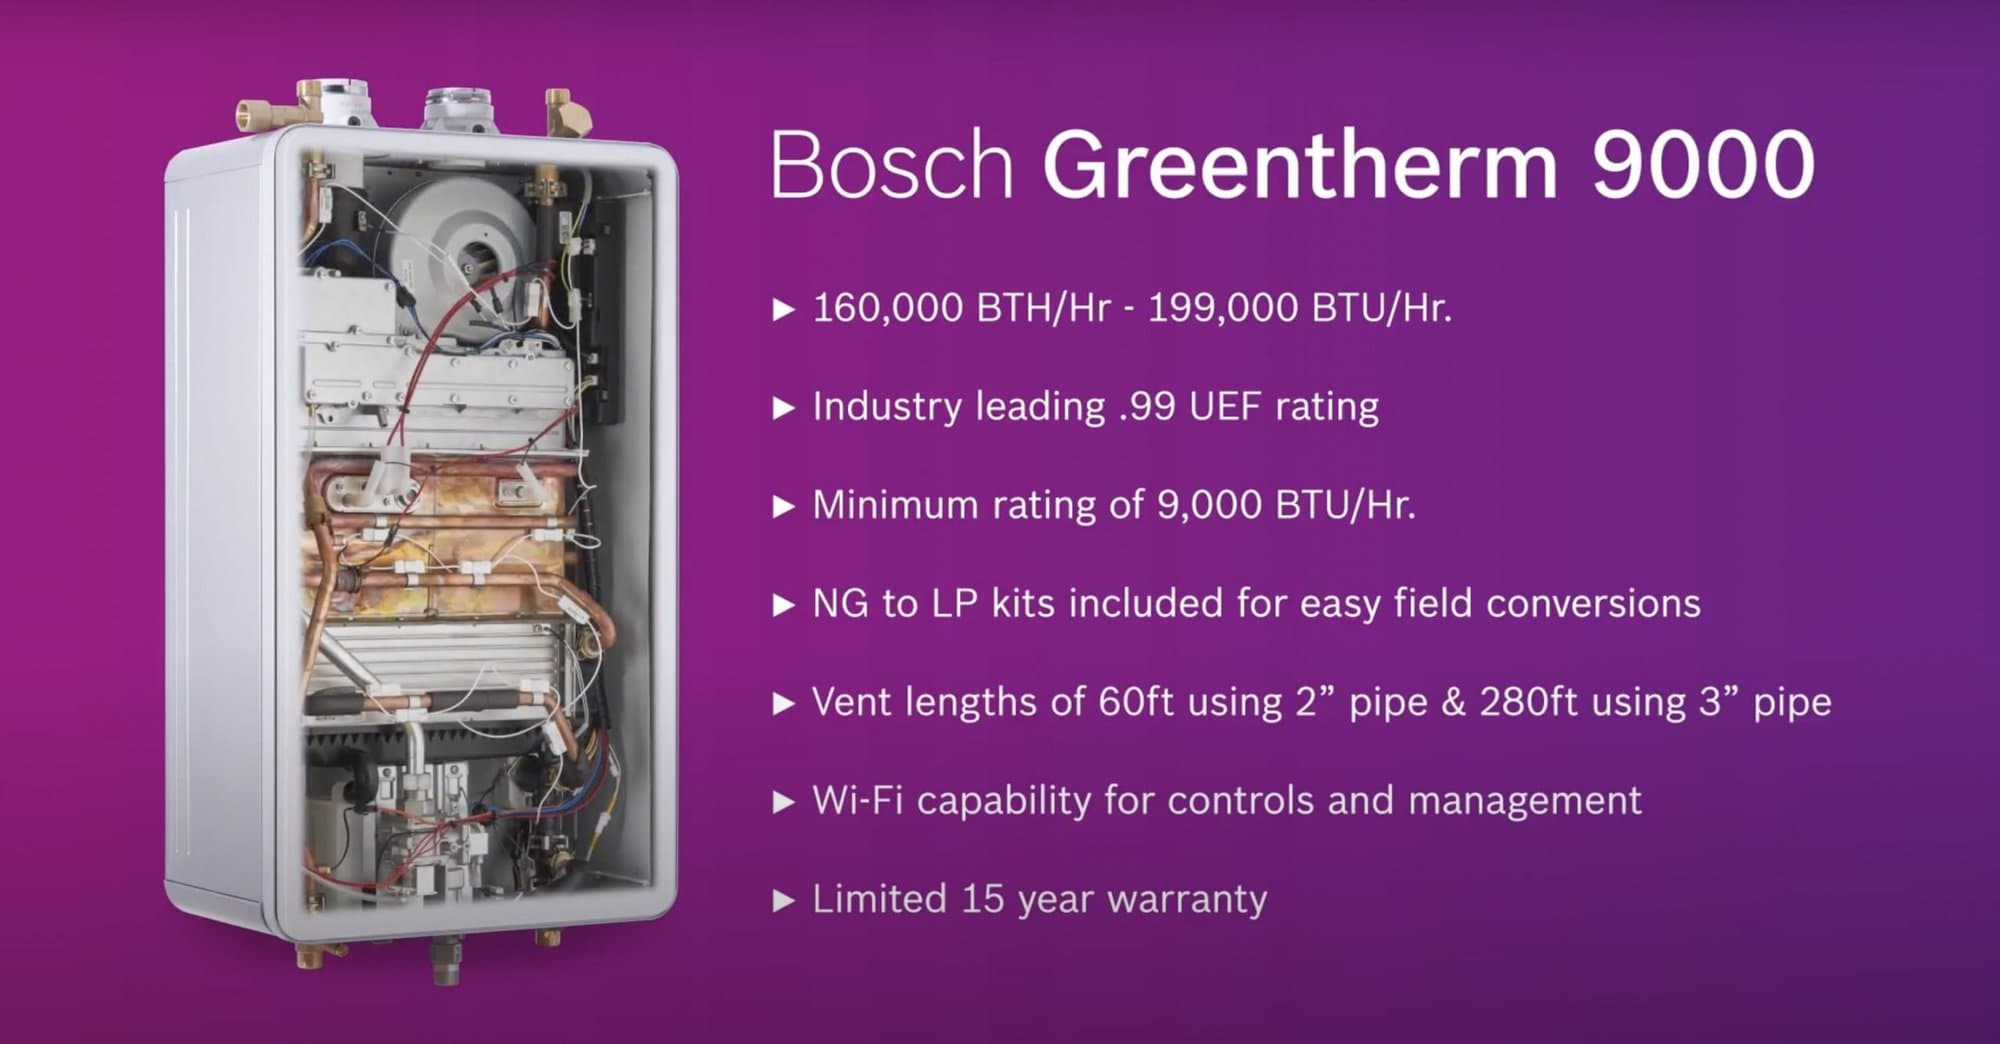 Gas Tankless Water Heater Bosch Greentherm 9000 and its benefits for homeowners and contractors